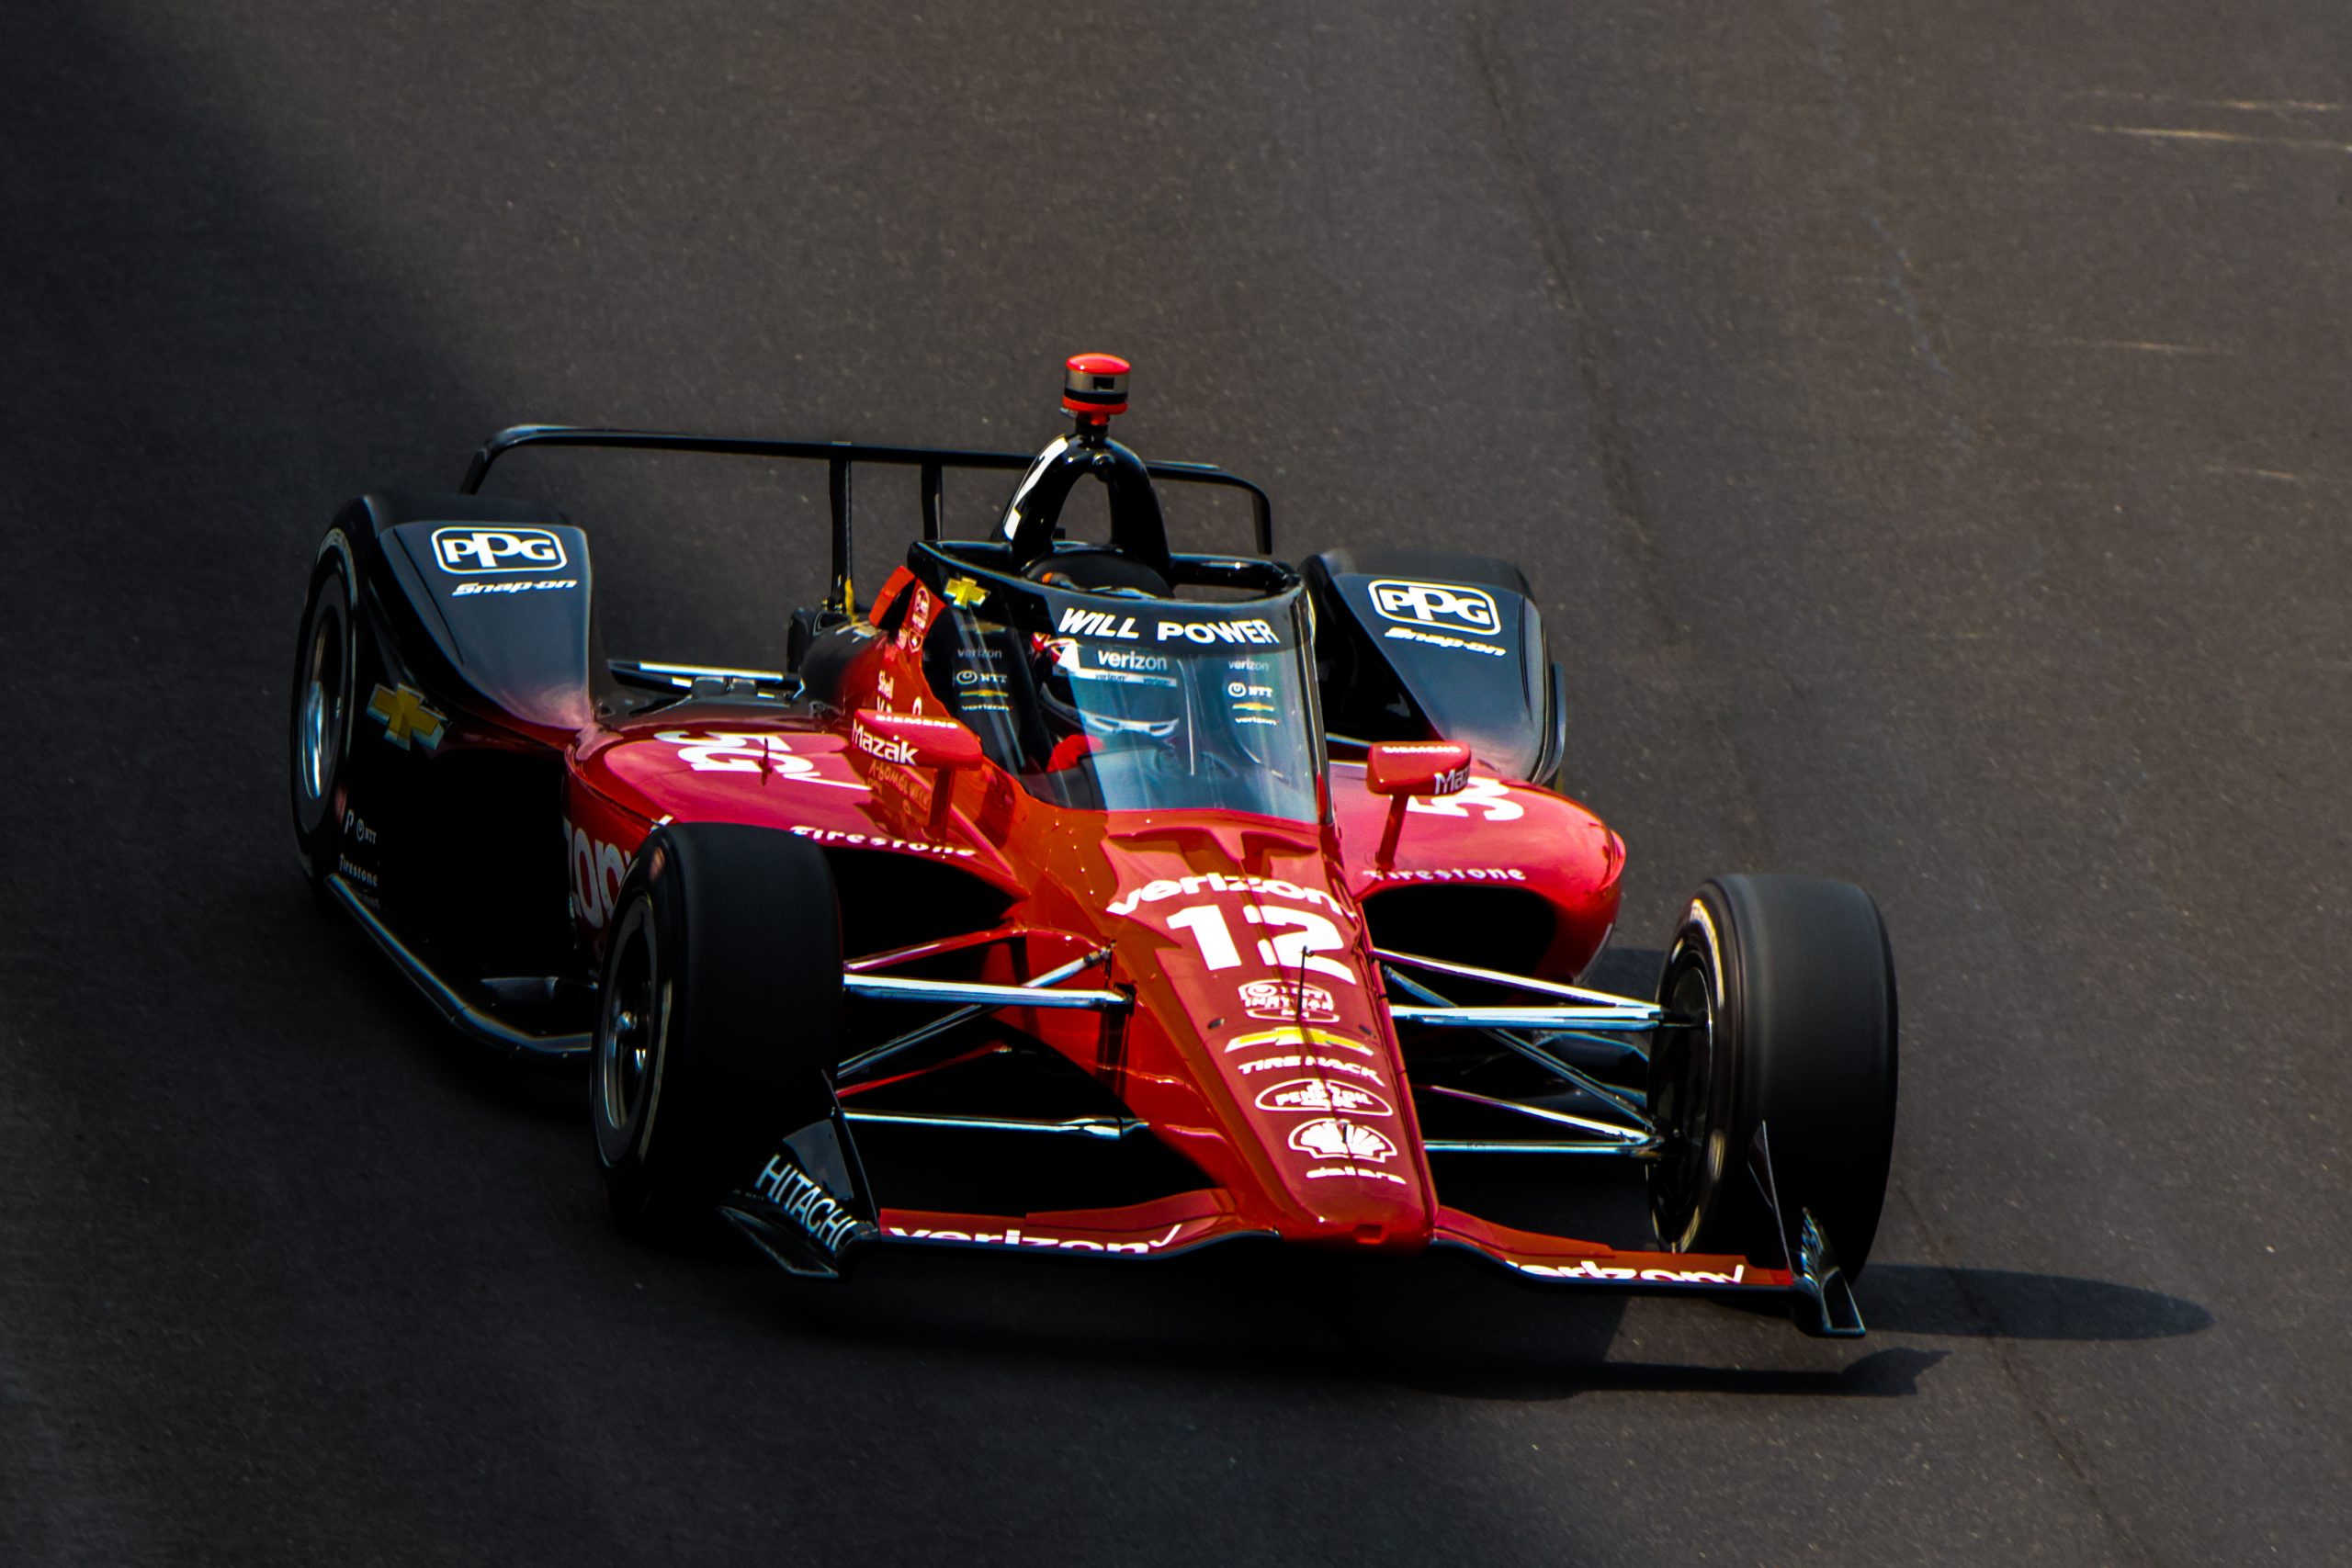 A handful of drivers believe Power is the driver to beat in Sunday's Indianapolis 500. (Photo: Wayne Riegle | The Podium Finish)